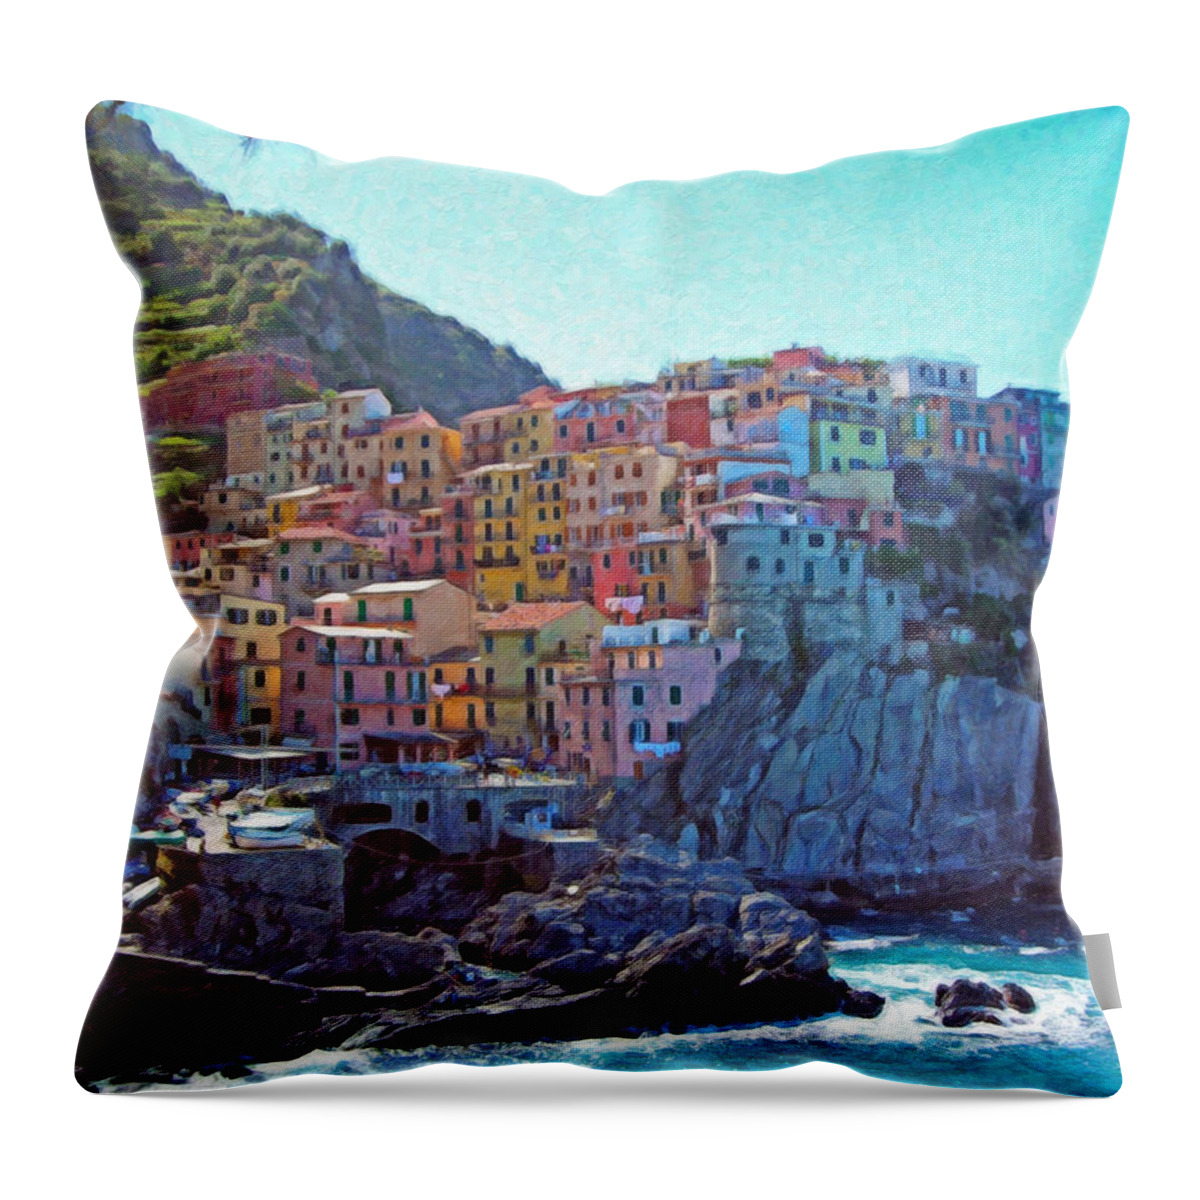 Cinque Throw Pillow featuring the painting Cinque Terre Itl2617 by Dean Wittle